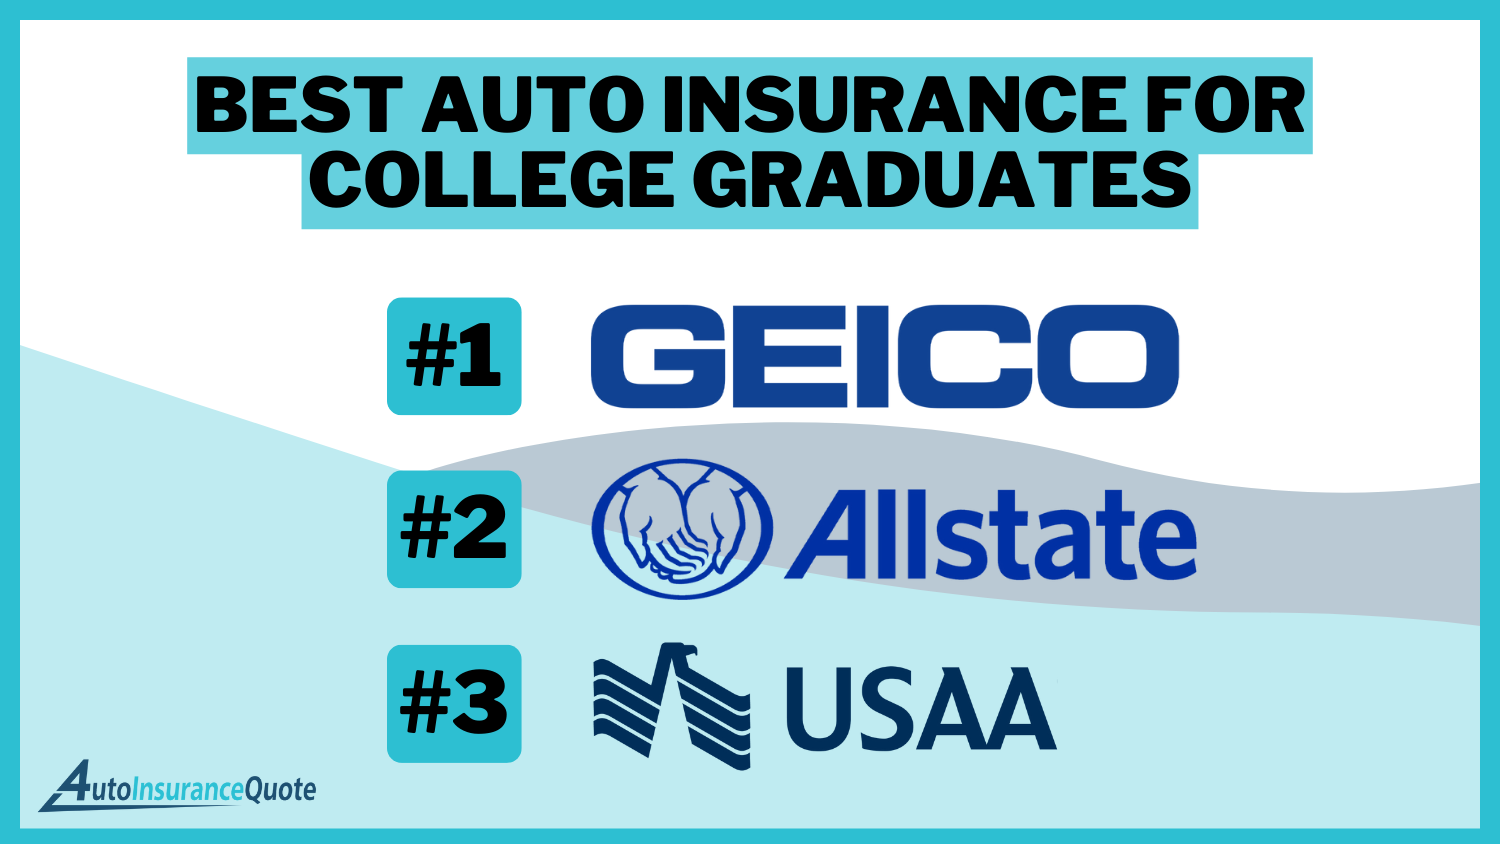 Best Auto Insurance for College Graduates: Geico, Allstate, and USAA